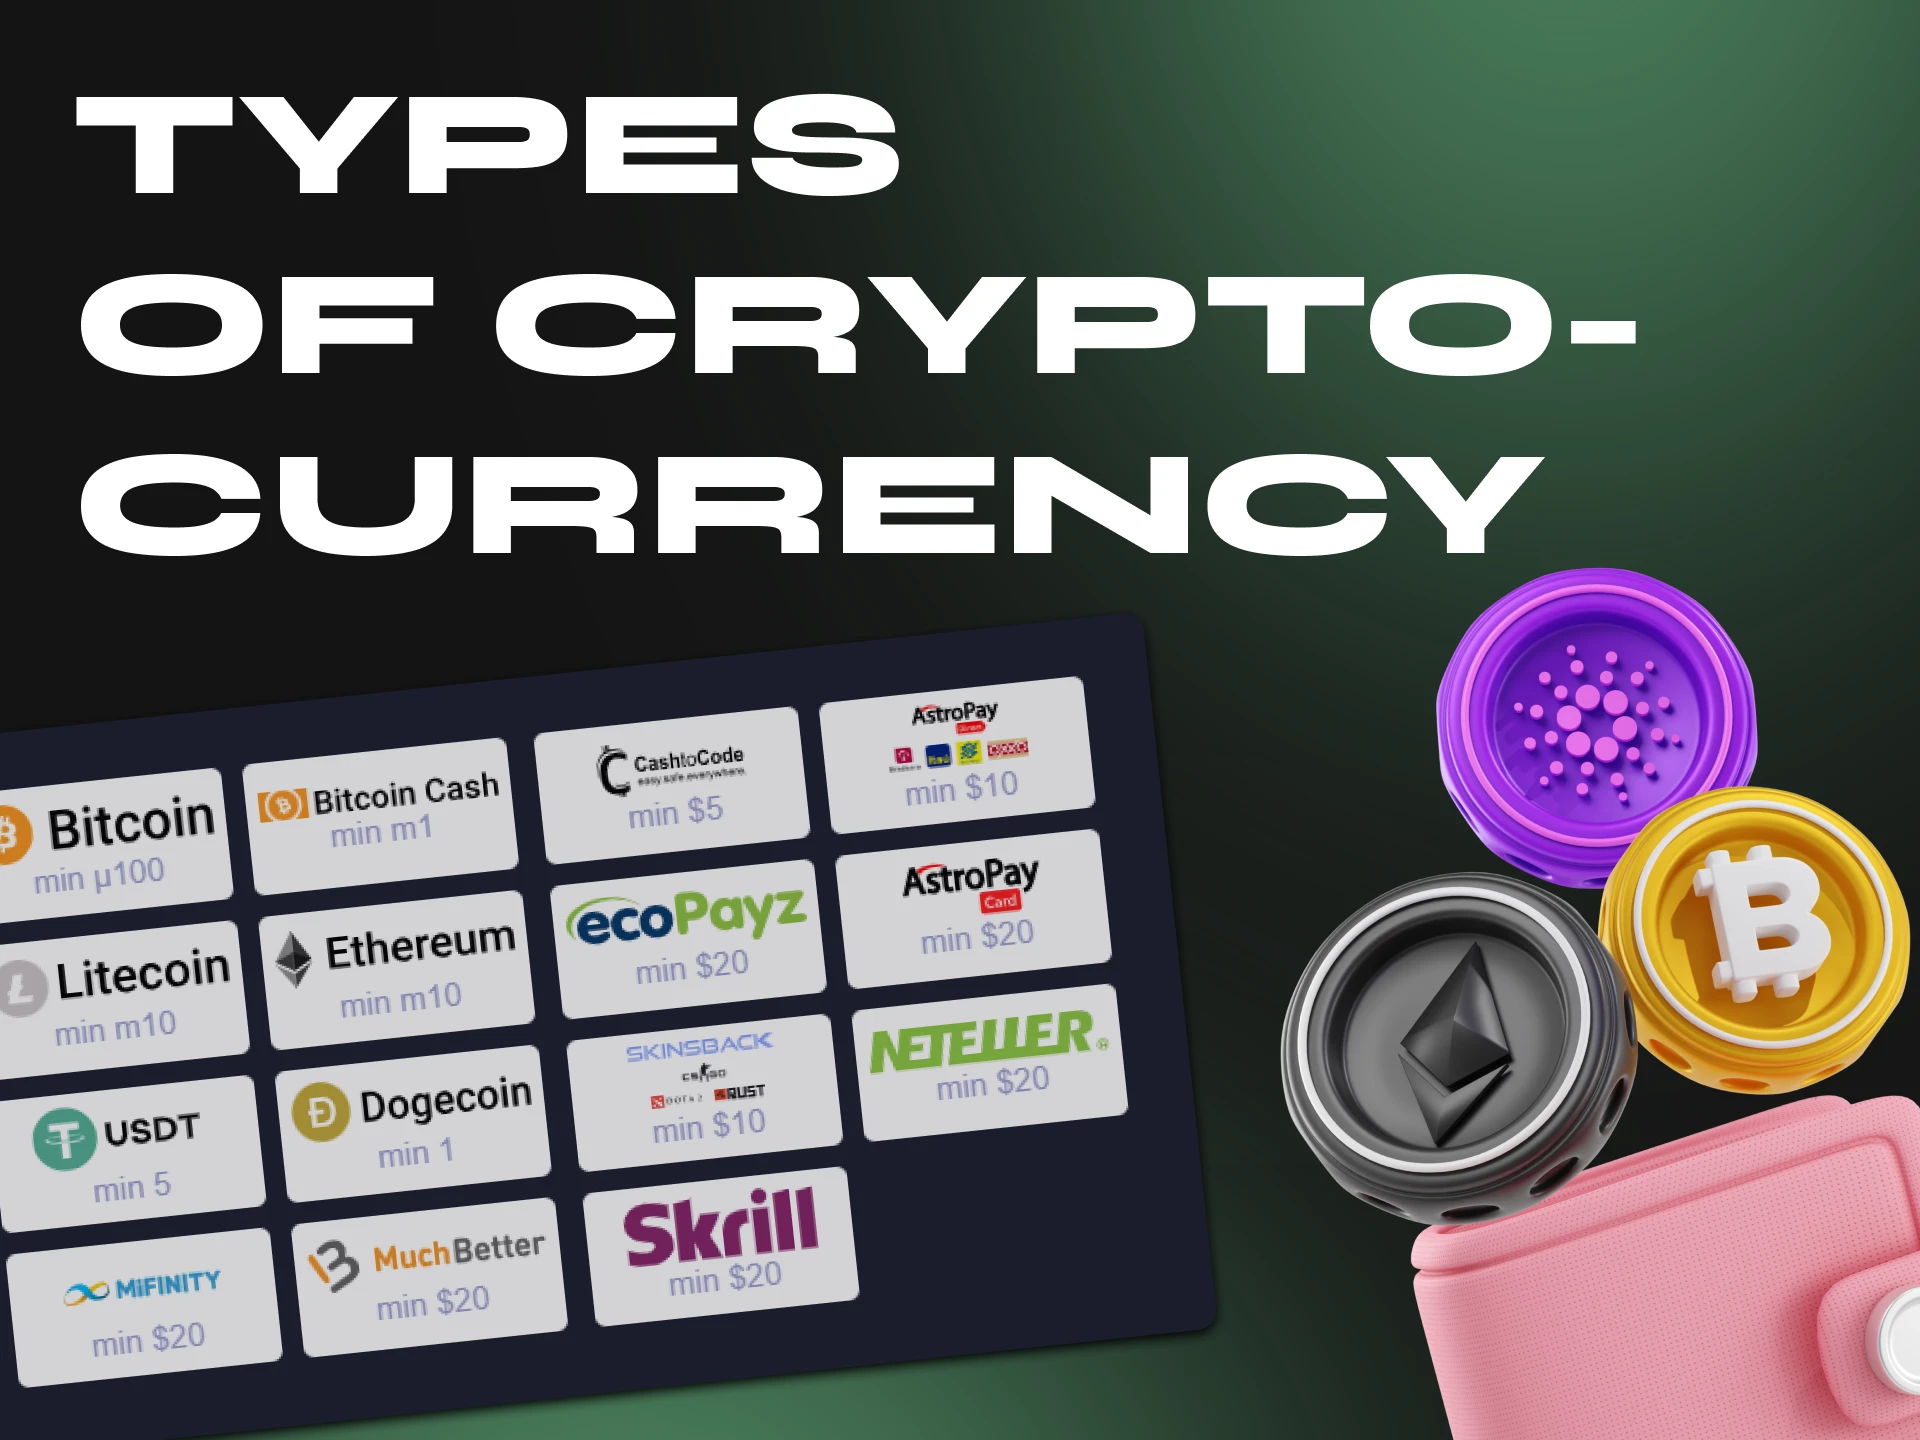 You can choose your favourite type of cryptocurrency at a crypto casino.